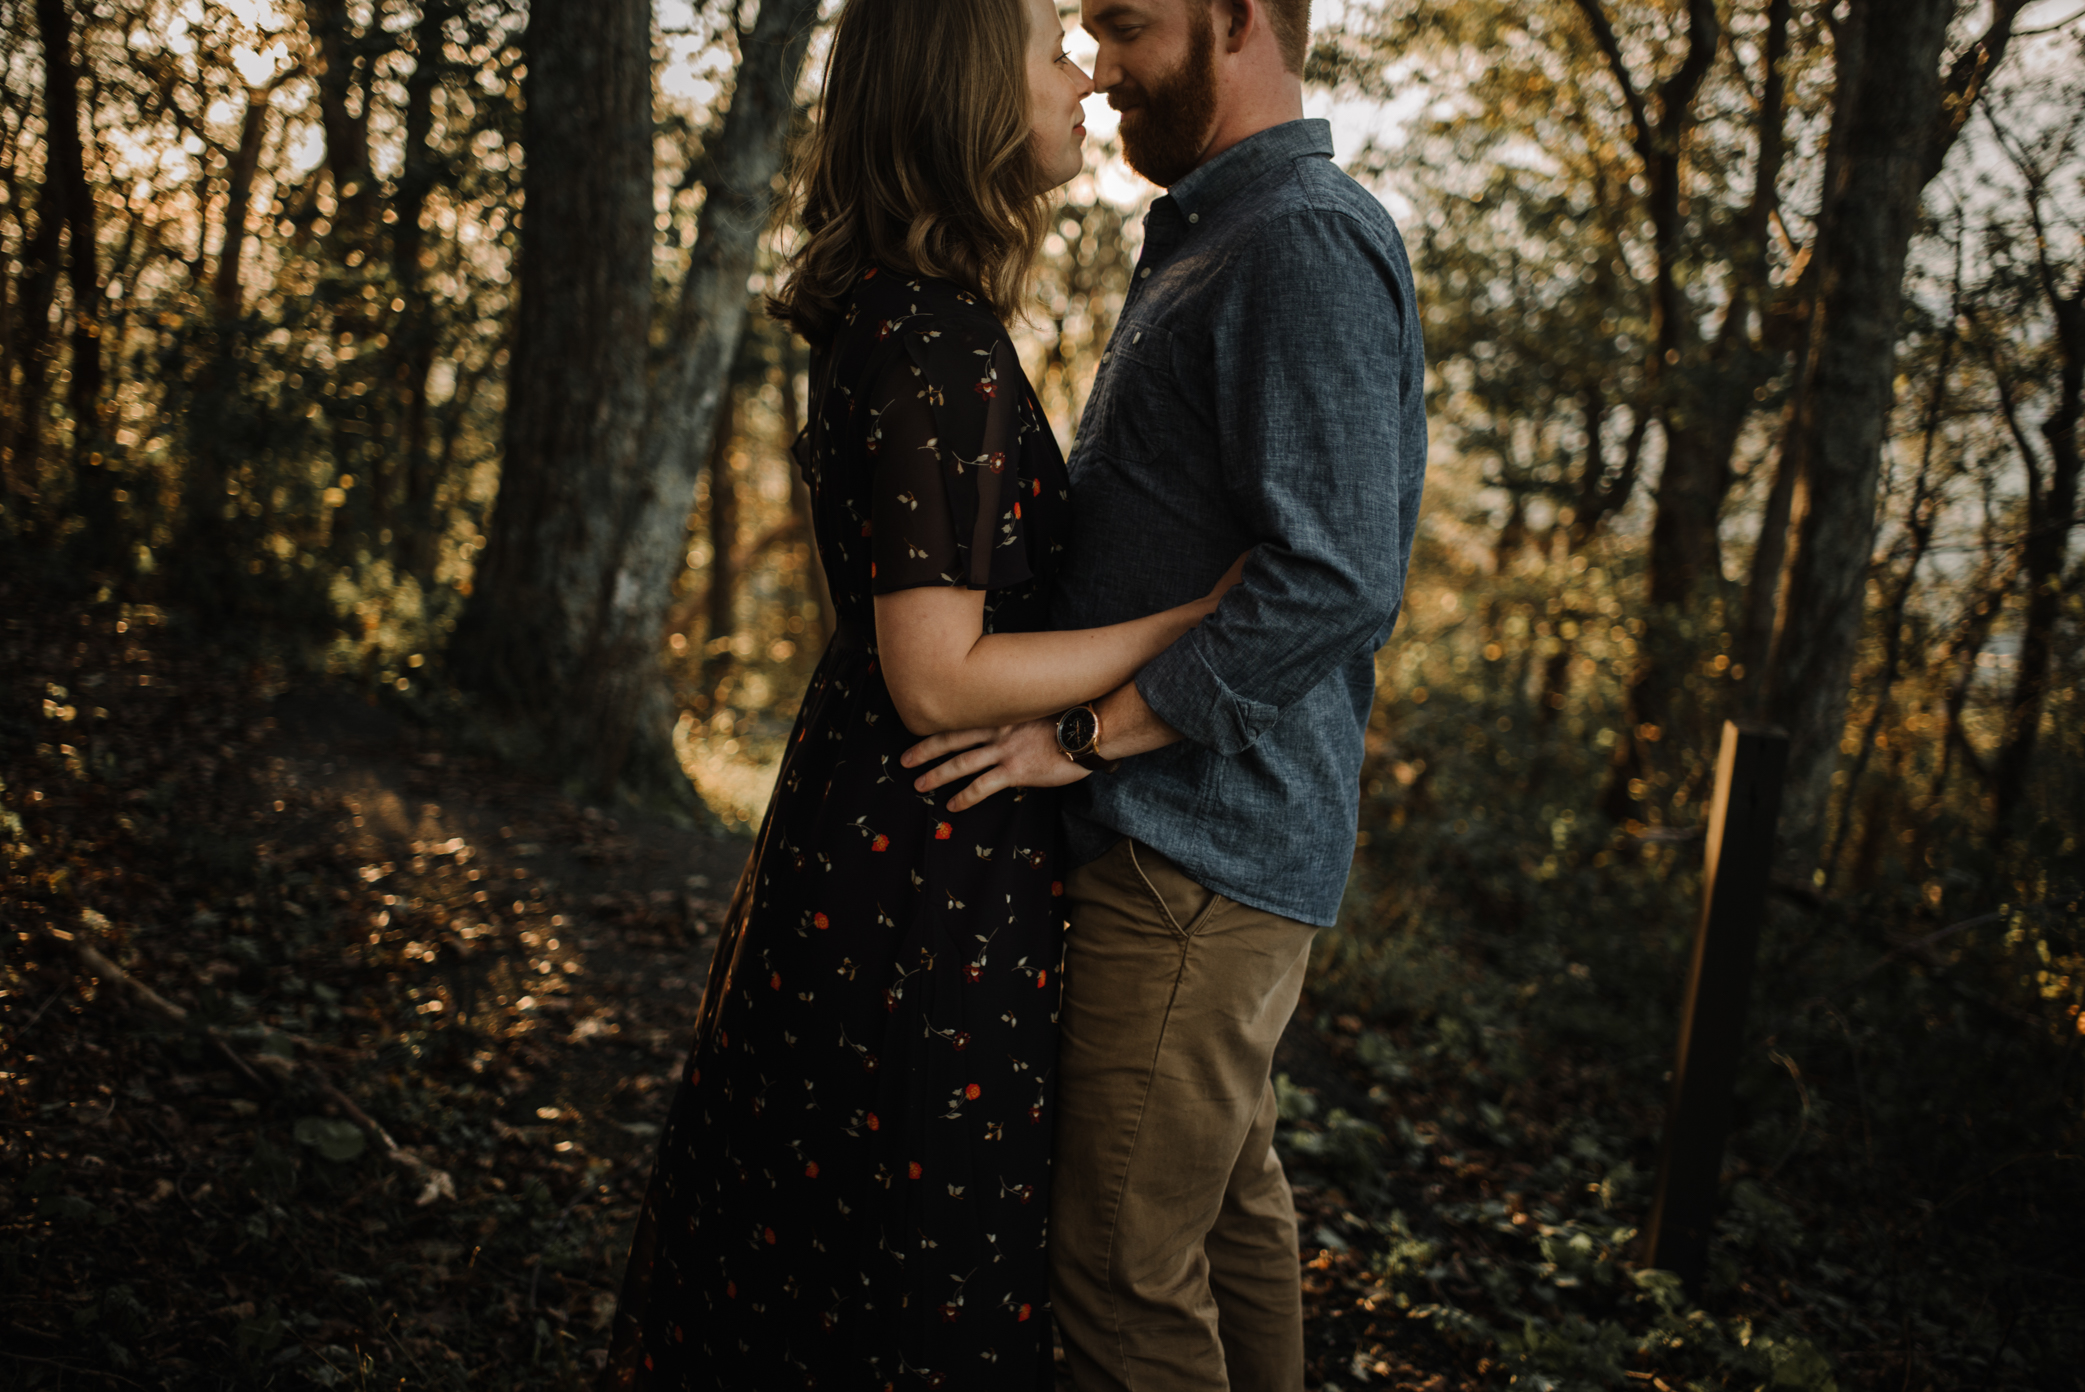 Molly and Zach Engagement Session - Fall Autumn Sunset Couple Adventure Session - Shenandoah National Park - Blue Ridge Parkway Skyline Drive - White Sails Creative_23.JPG